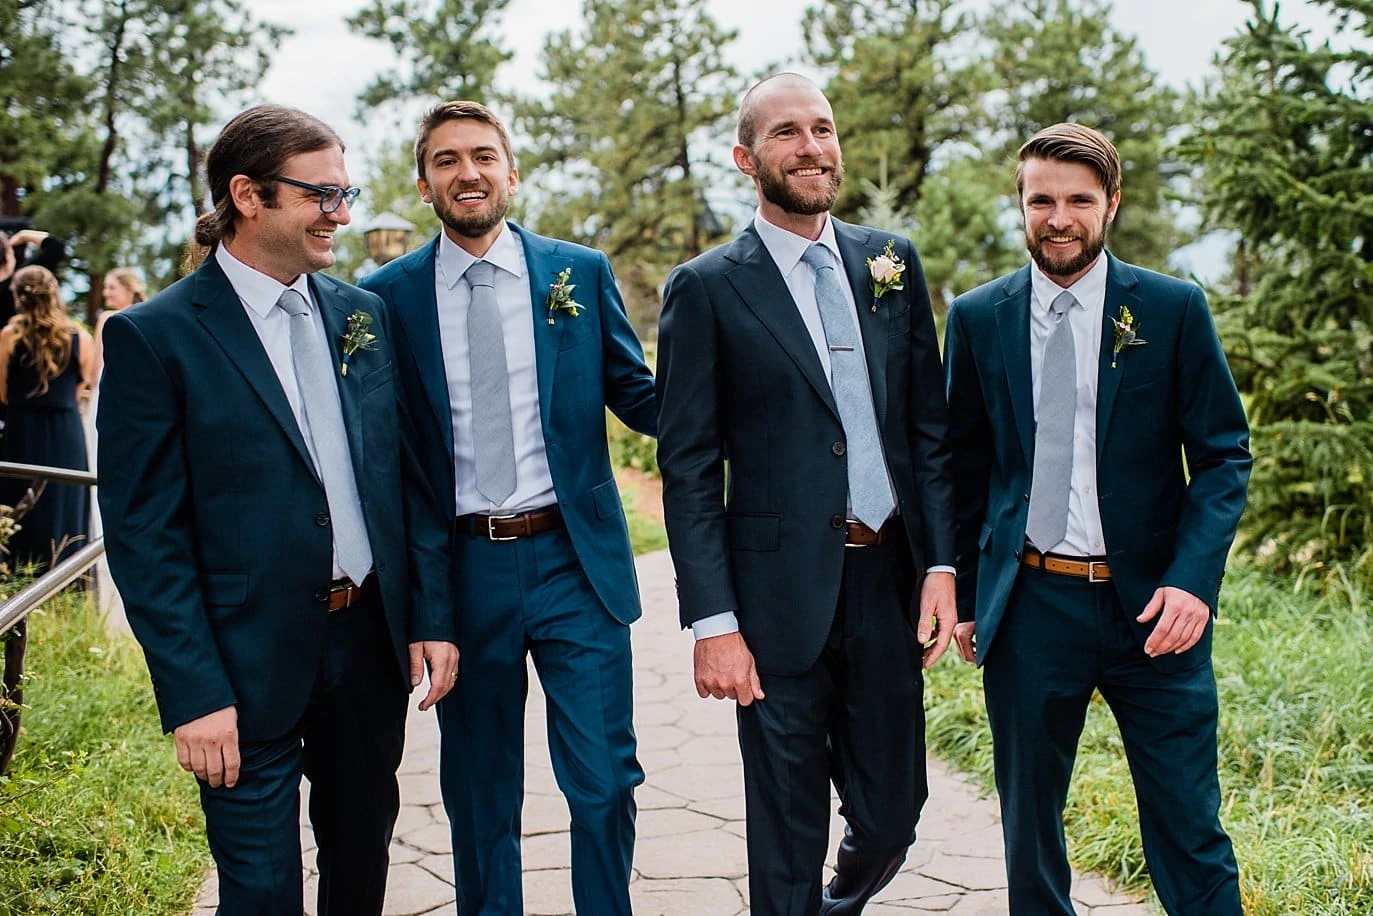 groom and groomsmen in mismatched navy blue suits and periwinkle ties